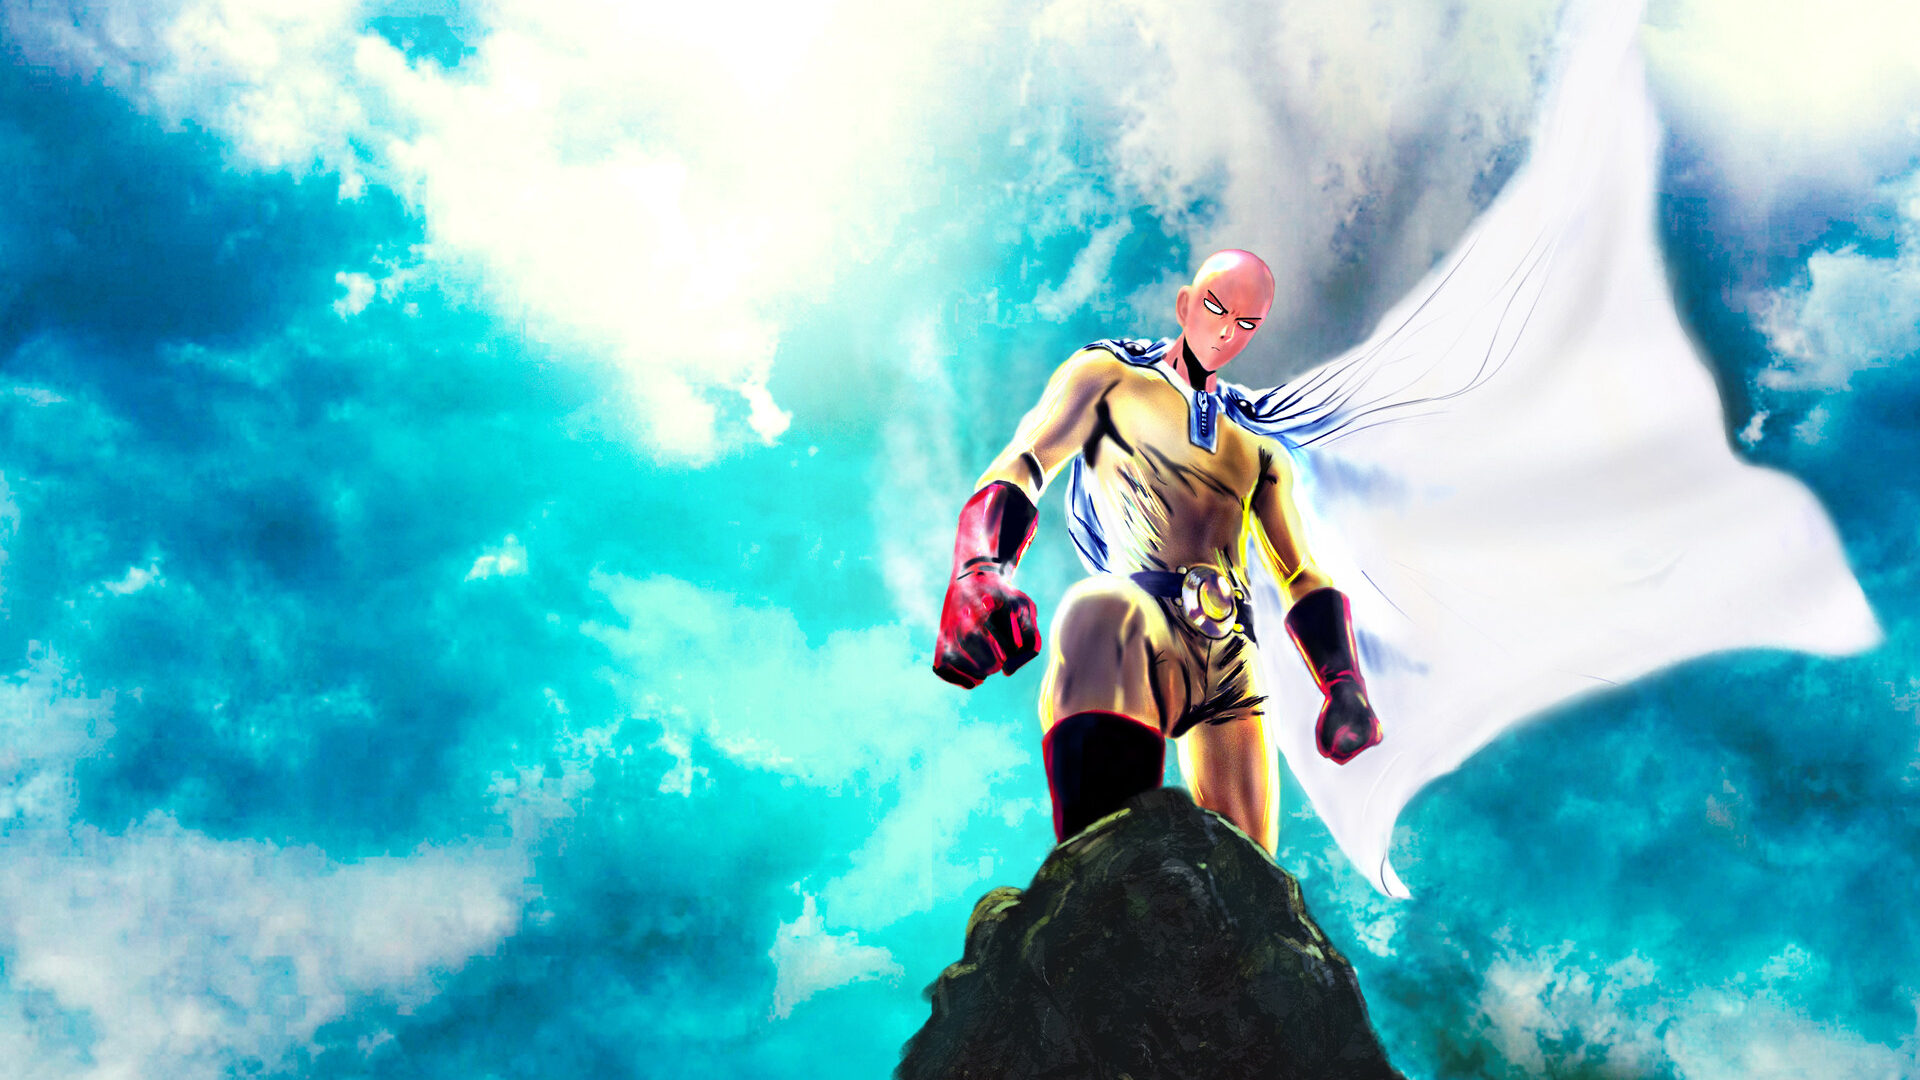 8. "Saitama" from One Punch Man - wide 5